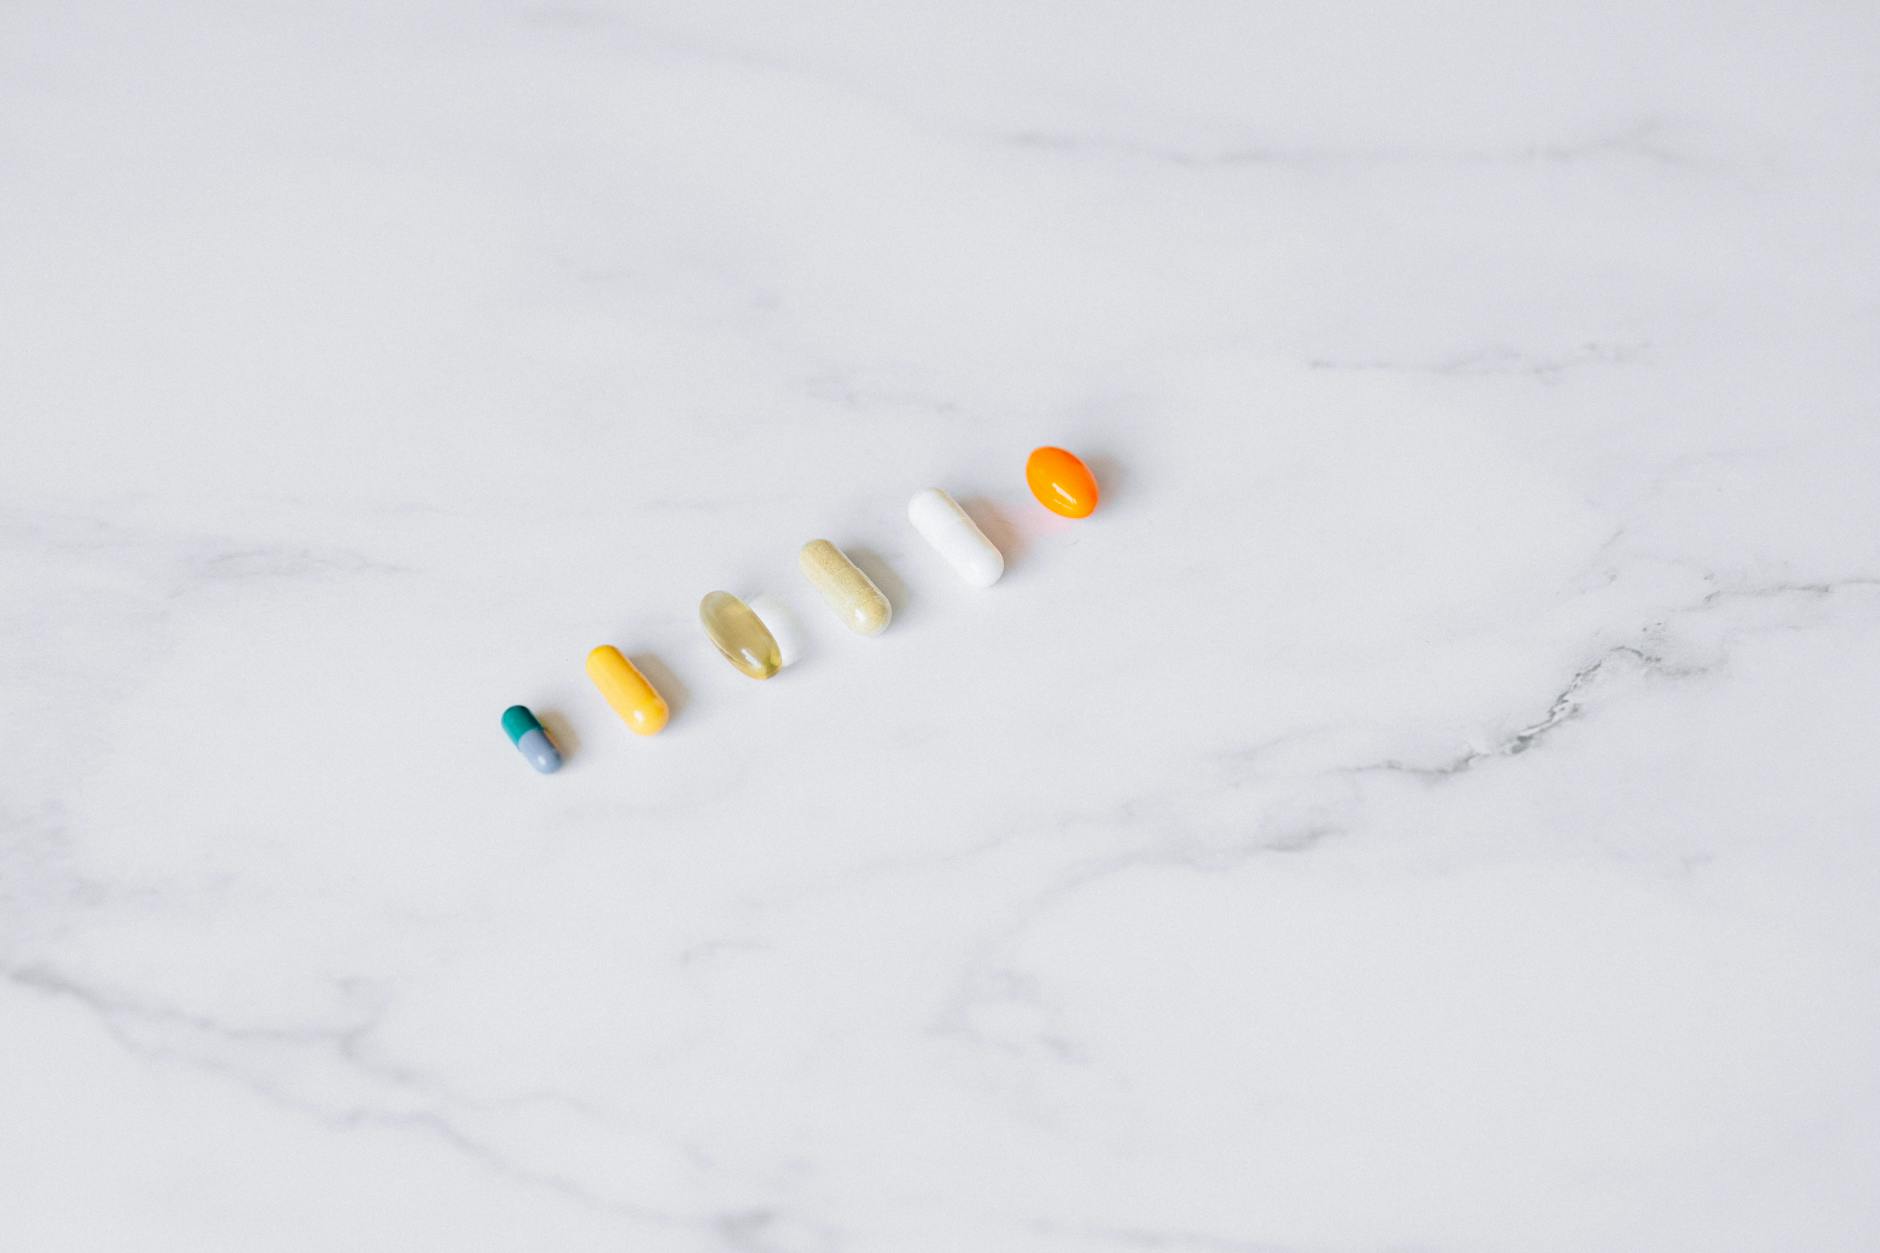 medications on a marble surface